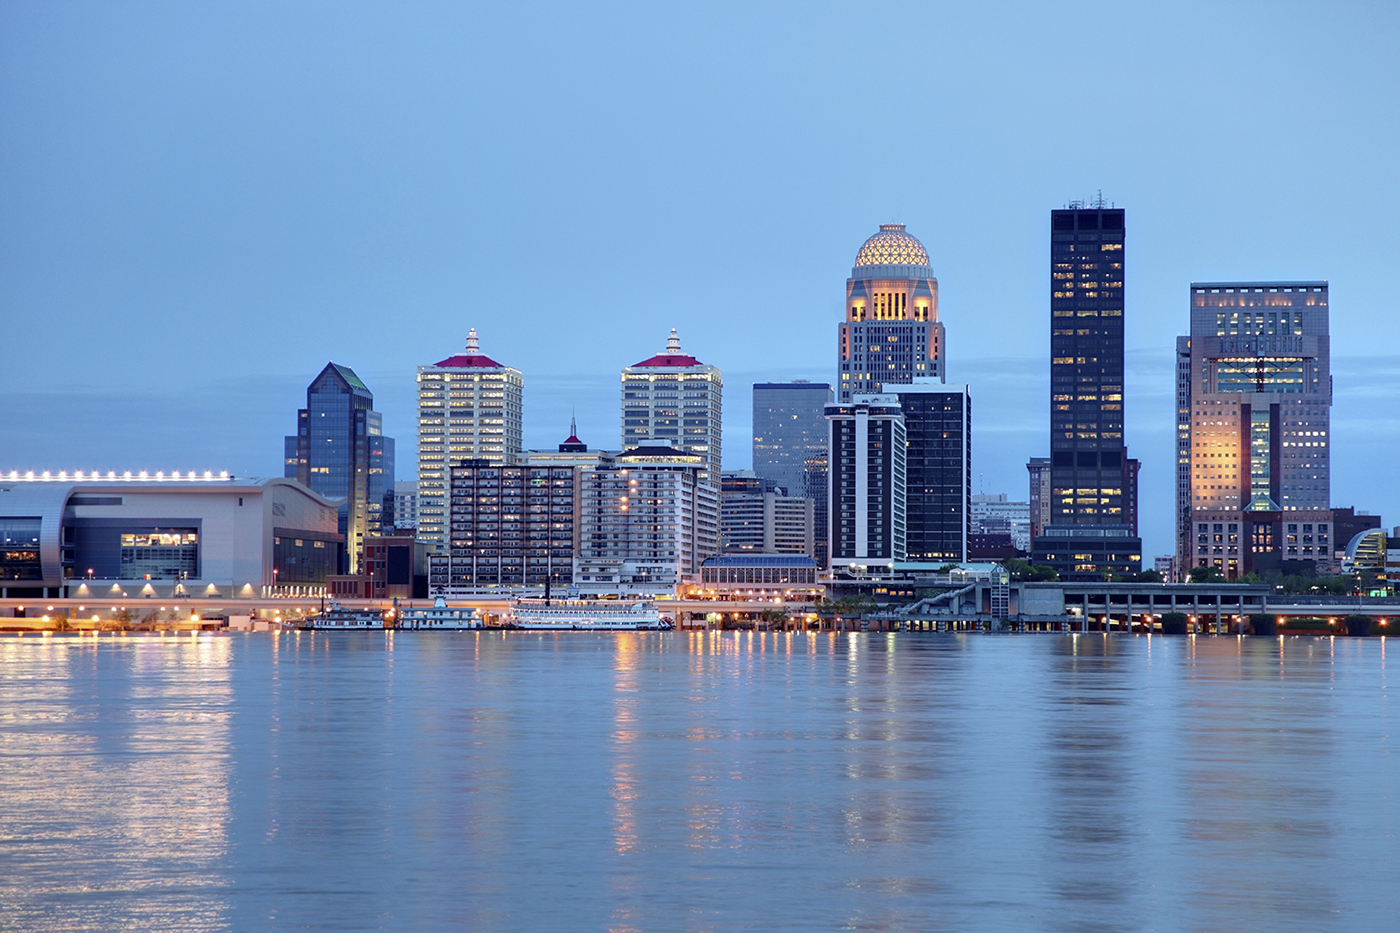 A skyline of a modern city with illuminated buildings reflected in a large body of water during twilight.